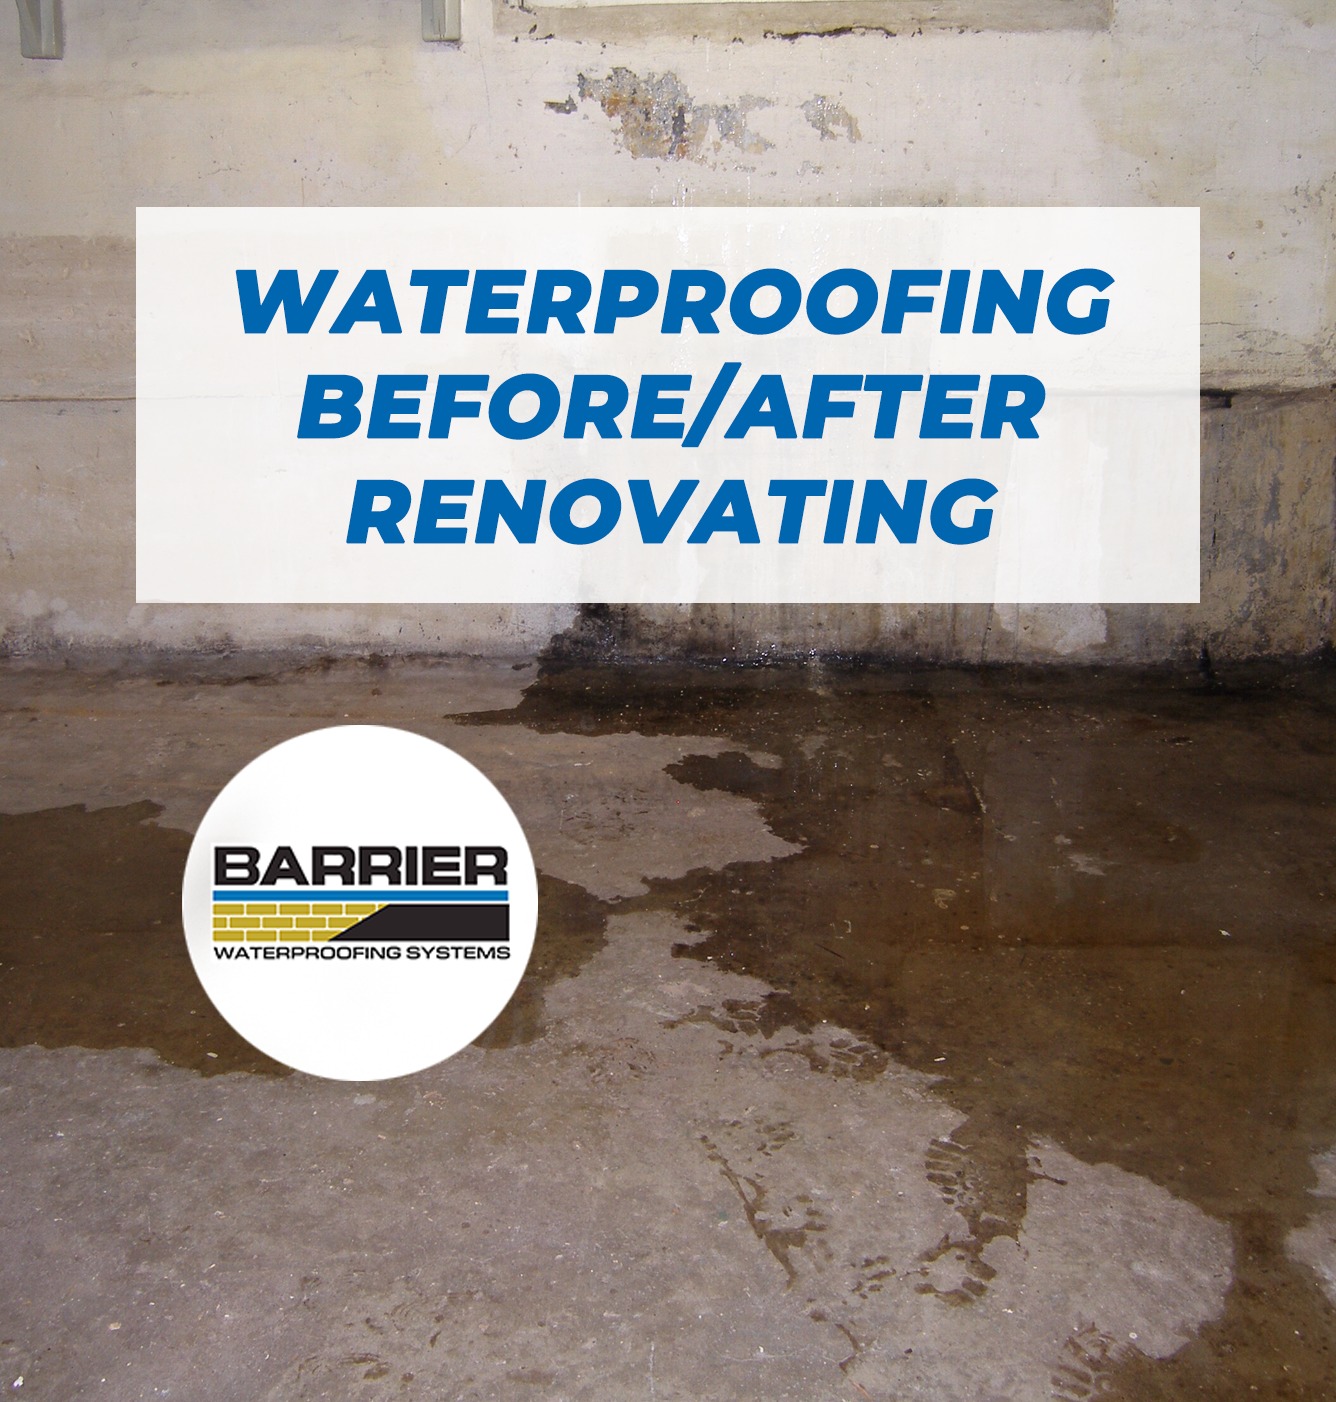 Water leaking before renovation means you should be waterproofing a basement